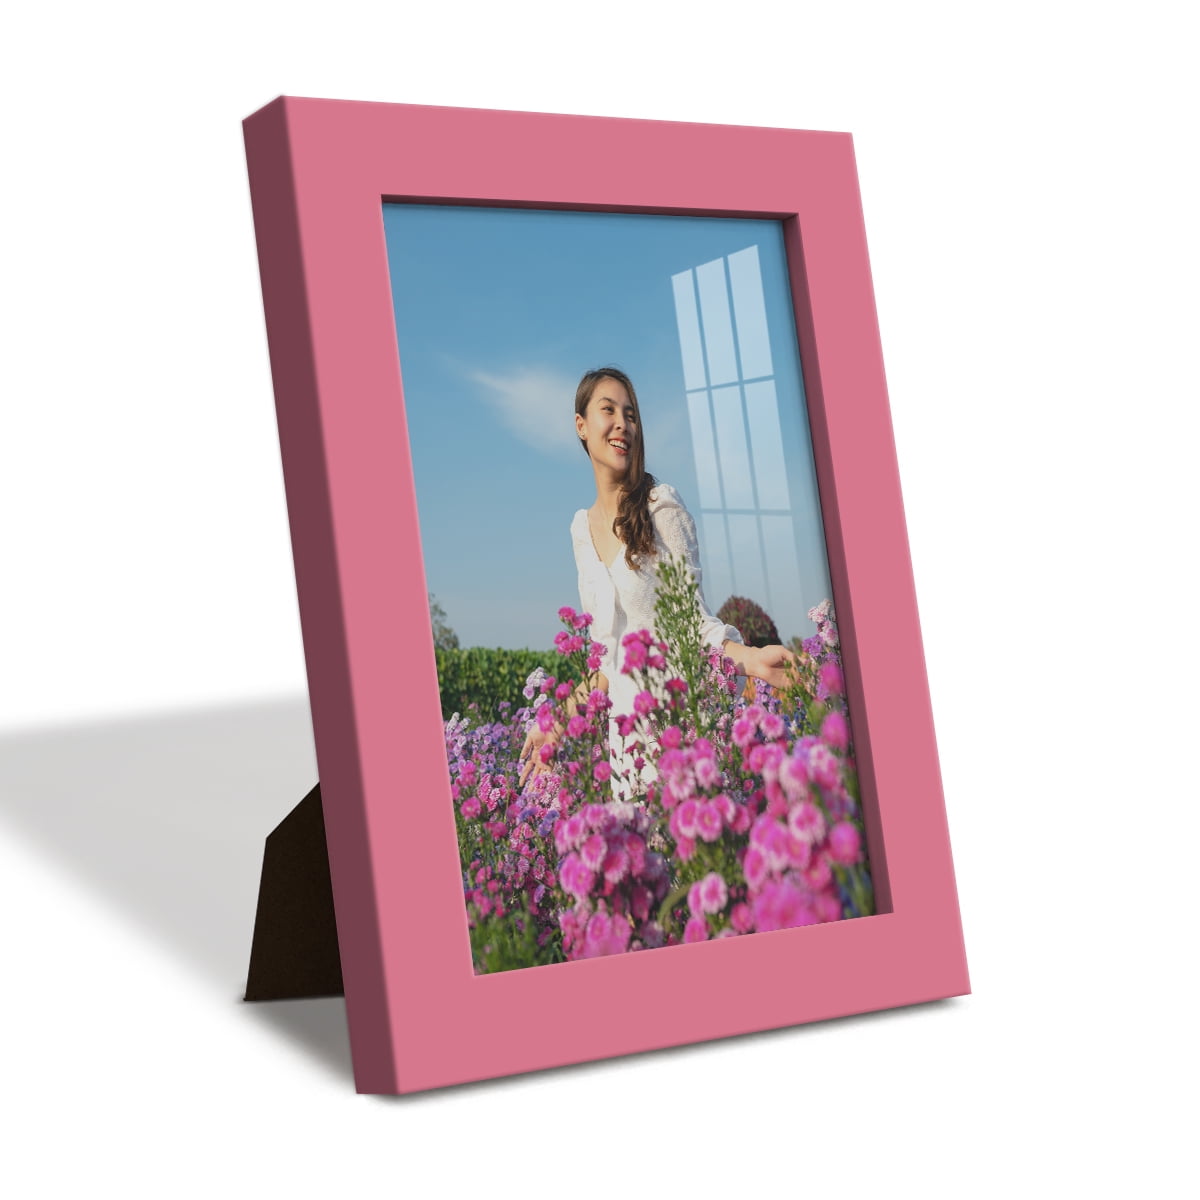 30x40 Frame Pink Real Wood Picture Frame Width 0.75 inches | Interior Frame  Depth 0.5 inches | Rose